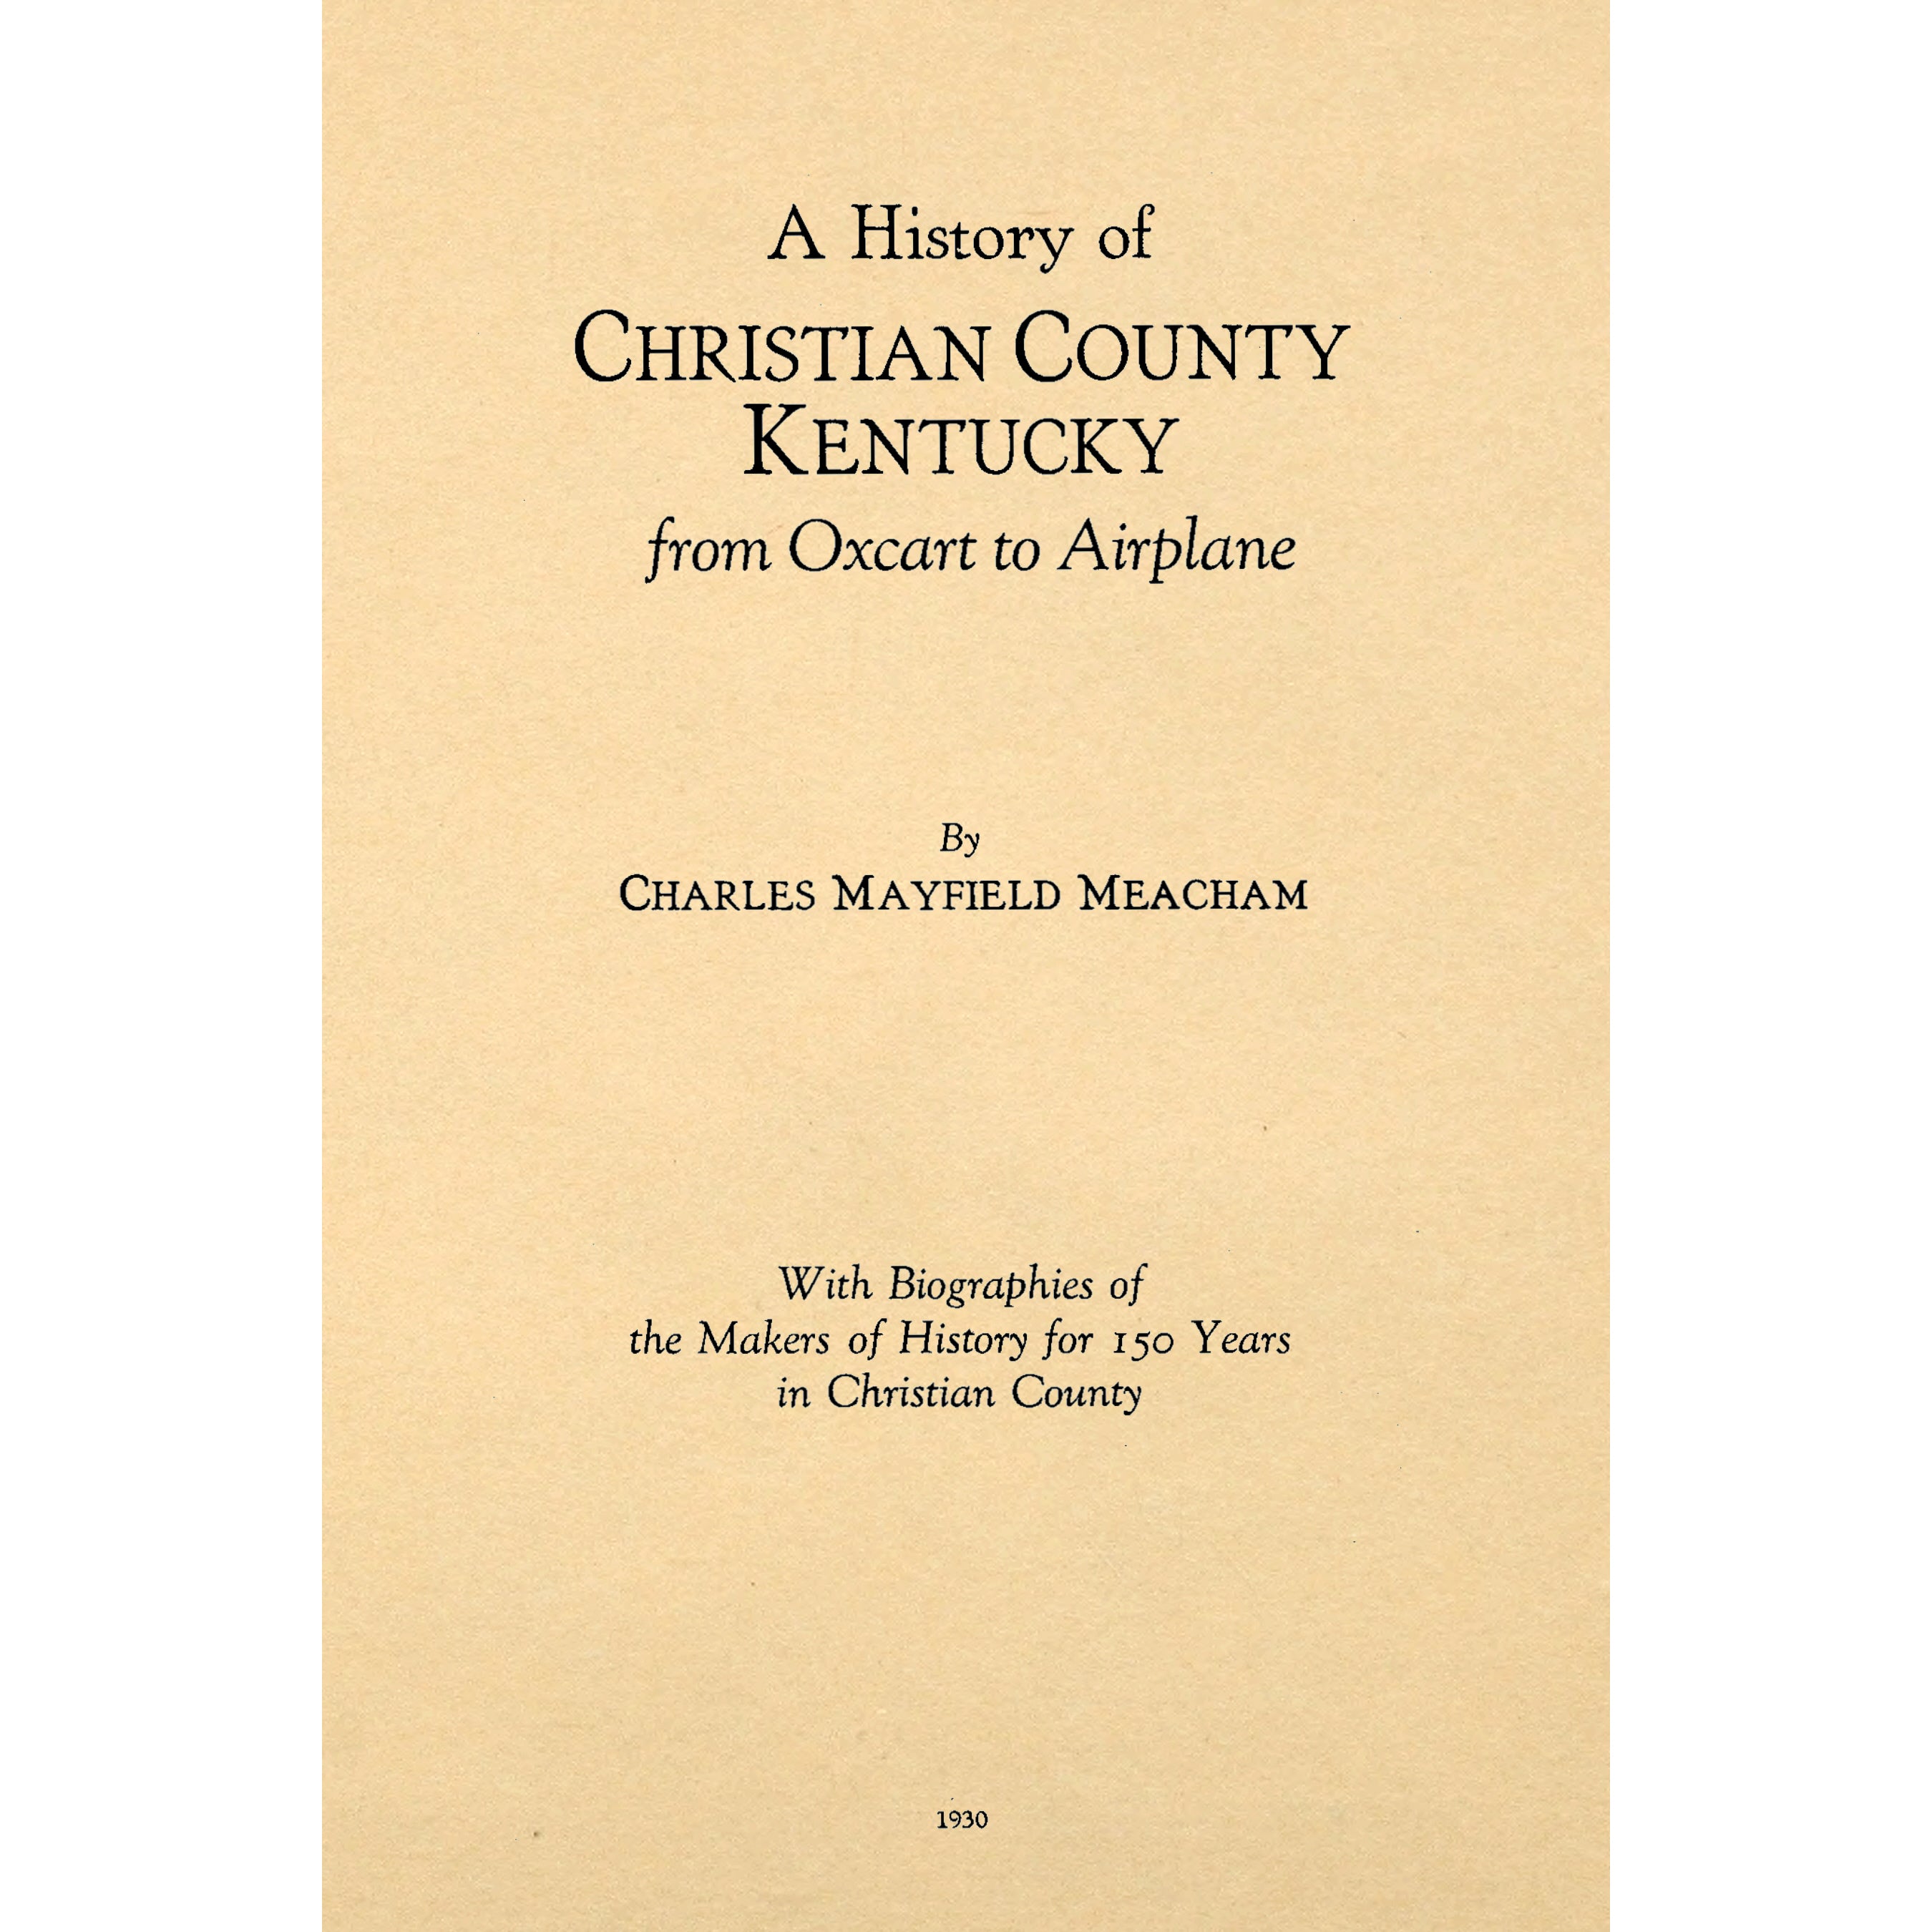 A History of Christian County, Kentucky,